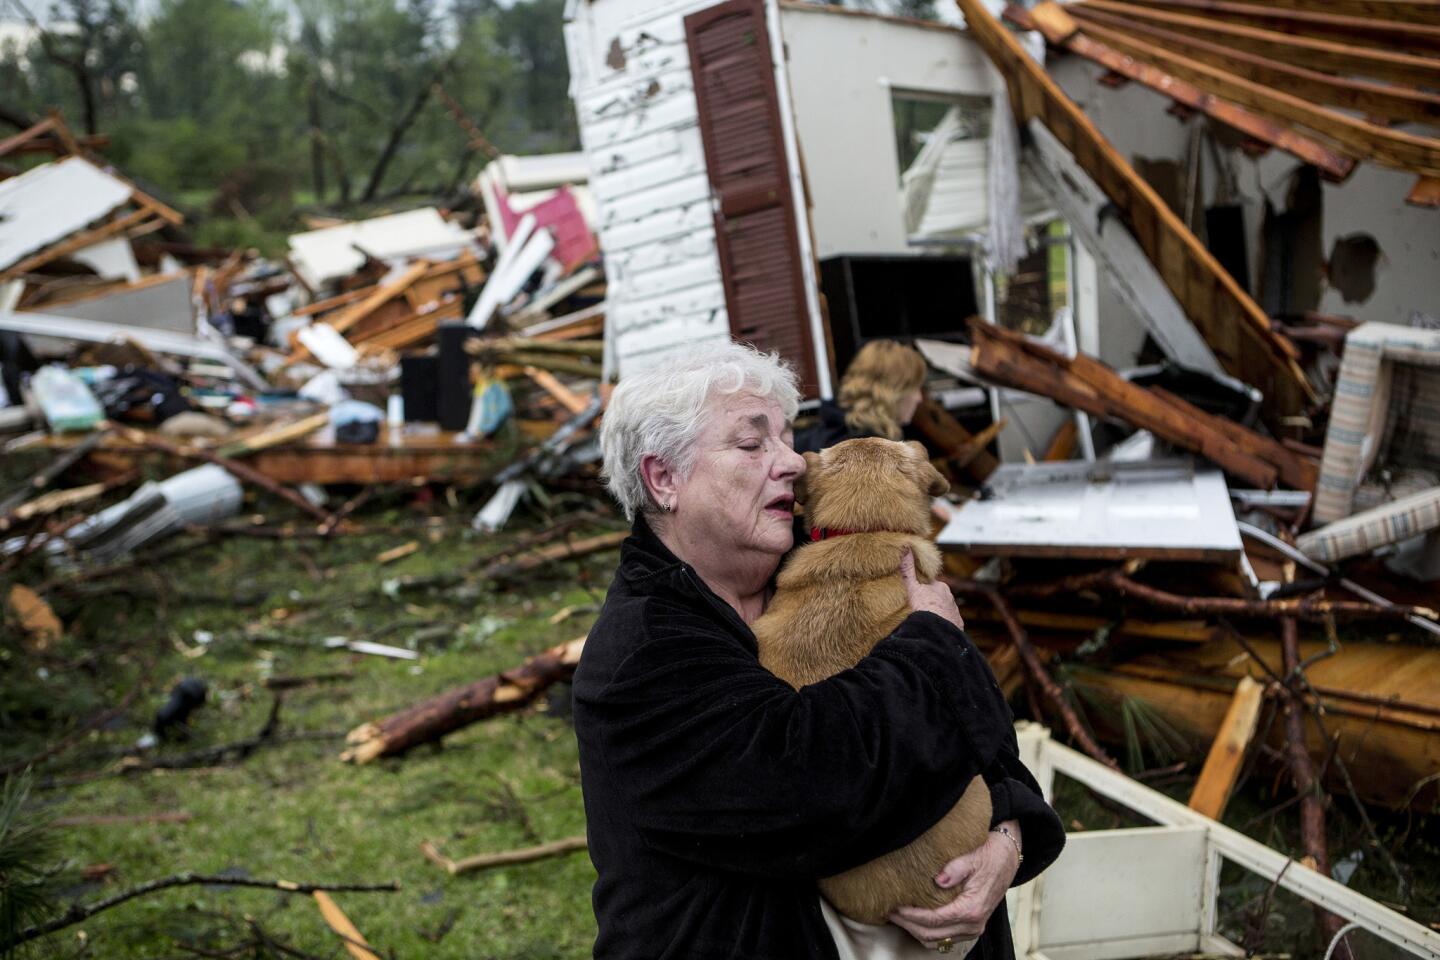 Constance Lambert embraces her dog after finding it alive when returning to her destroyed home in Tupelo, Miss.